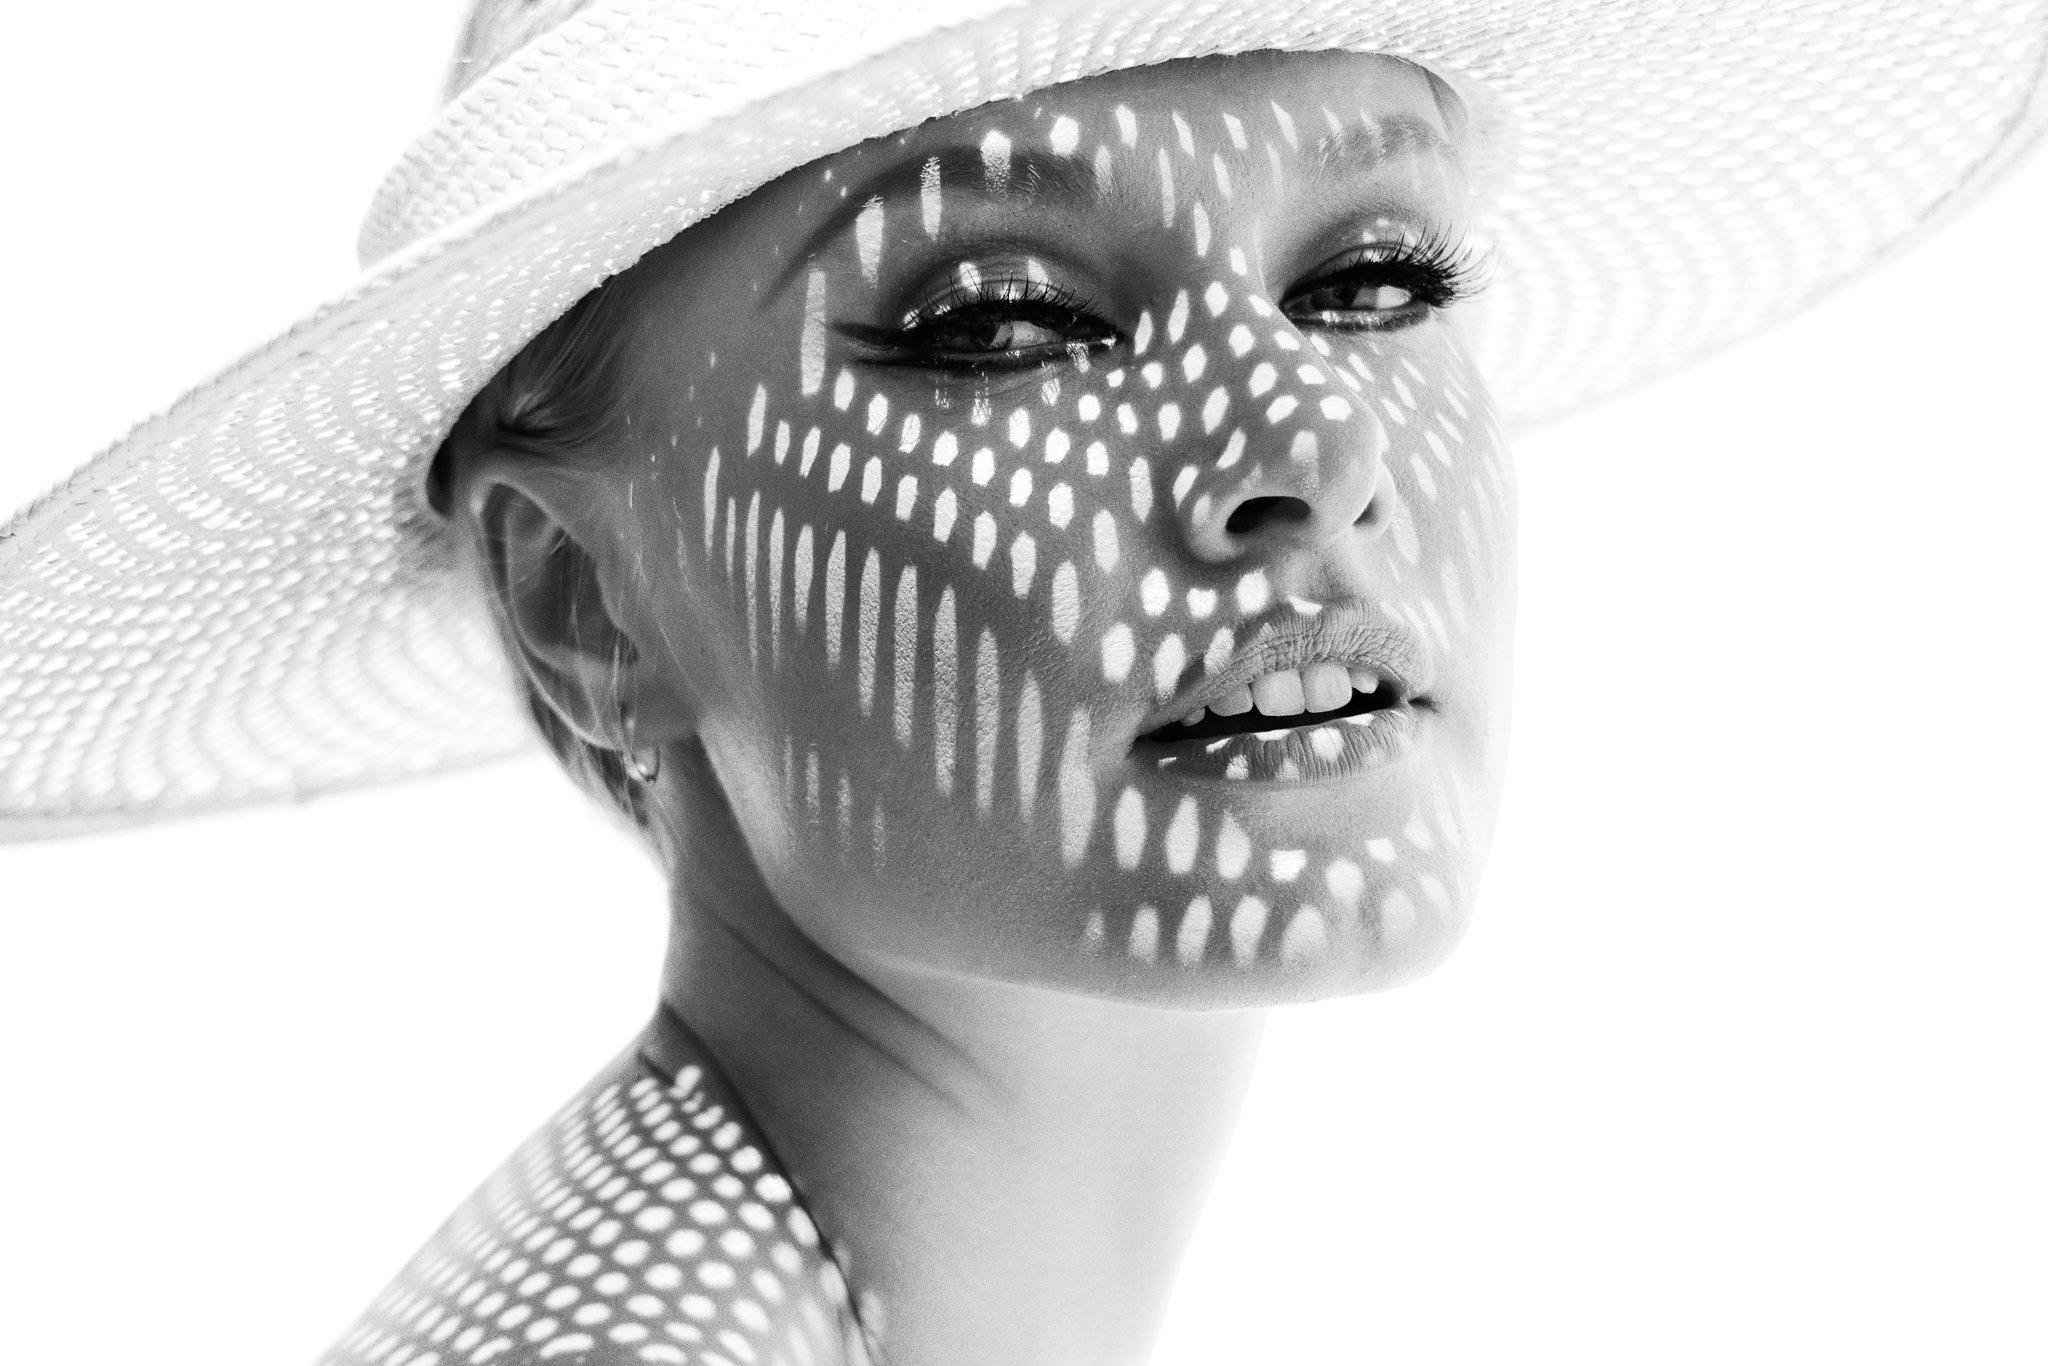 Woman in white brimmed hat with holes that's casting high contrast shadows on her face.